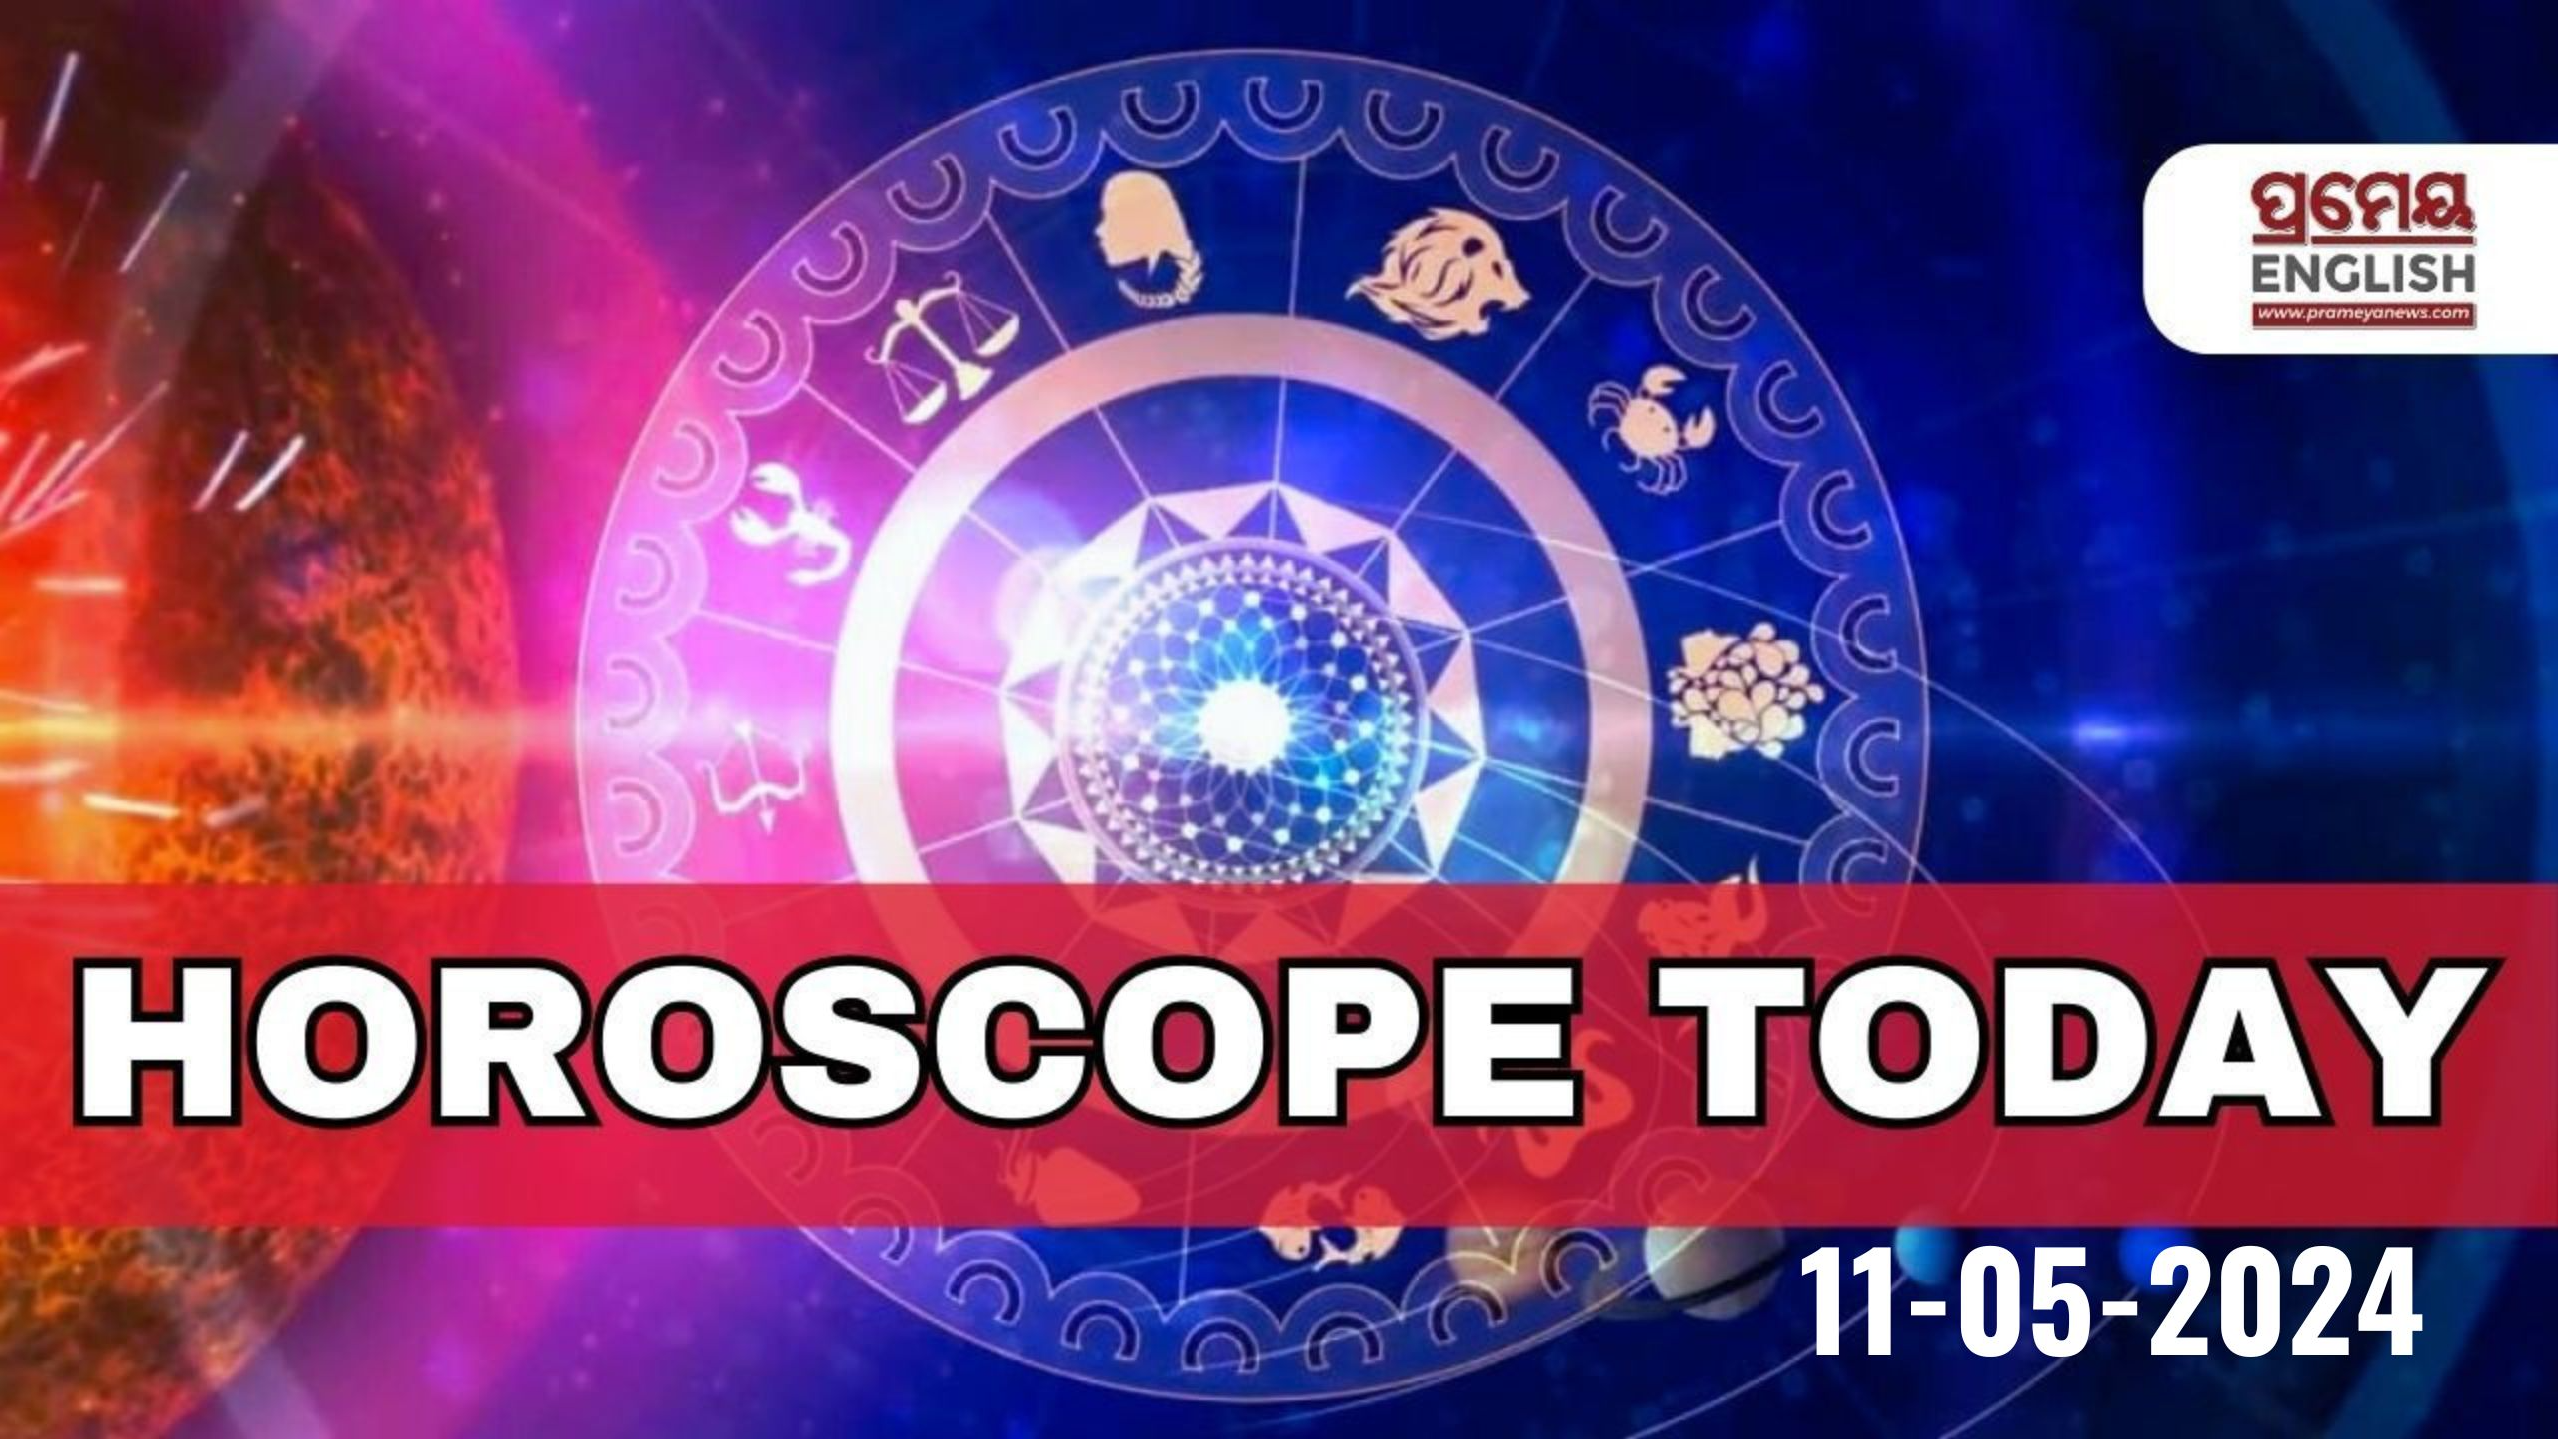 Horoscope Today: Astrological prediction for May 11, 2024